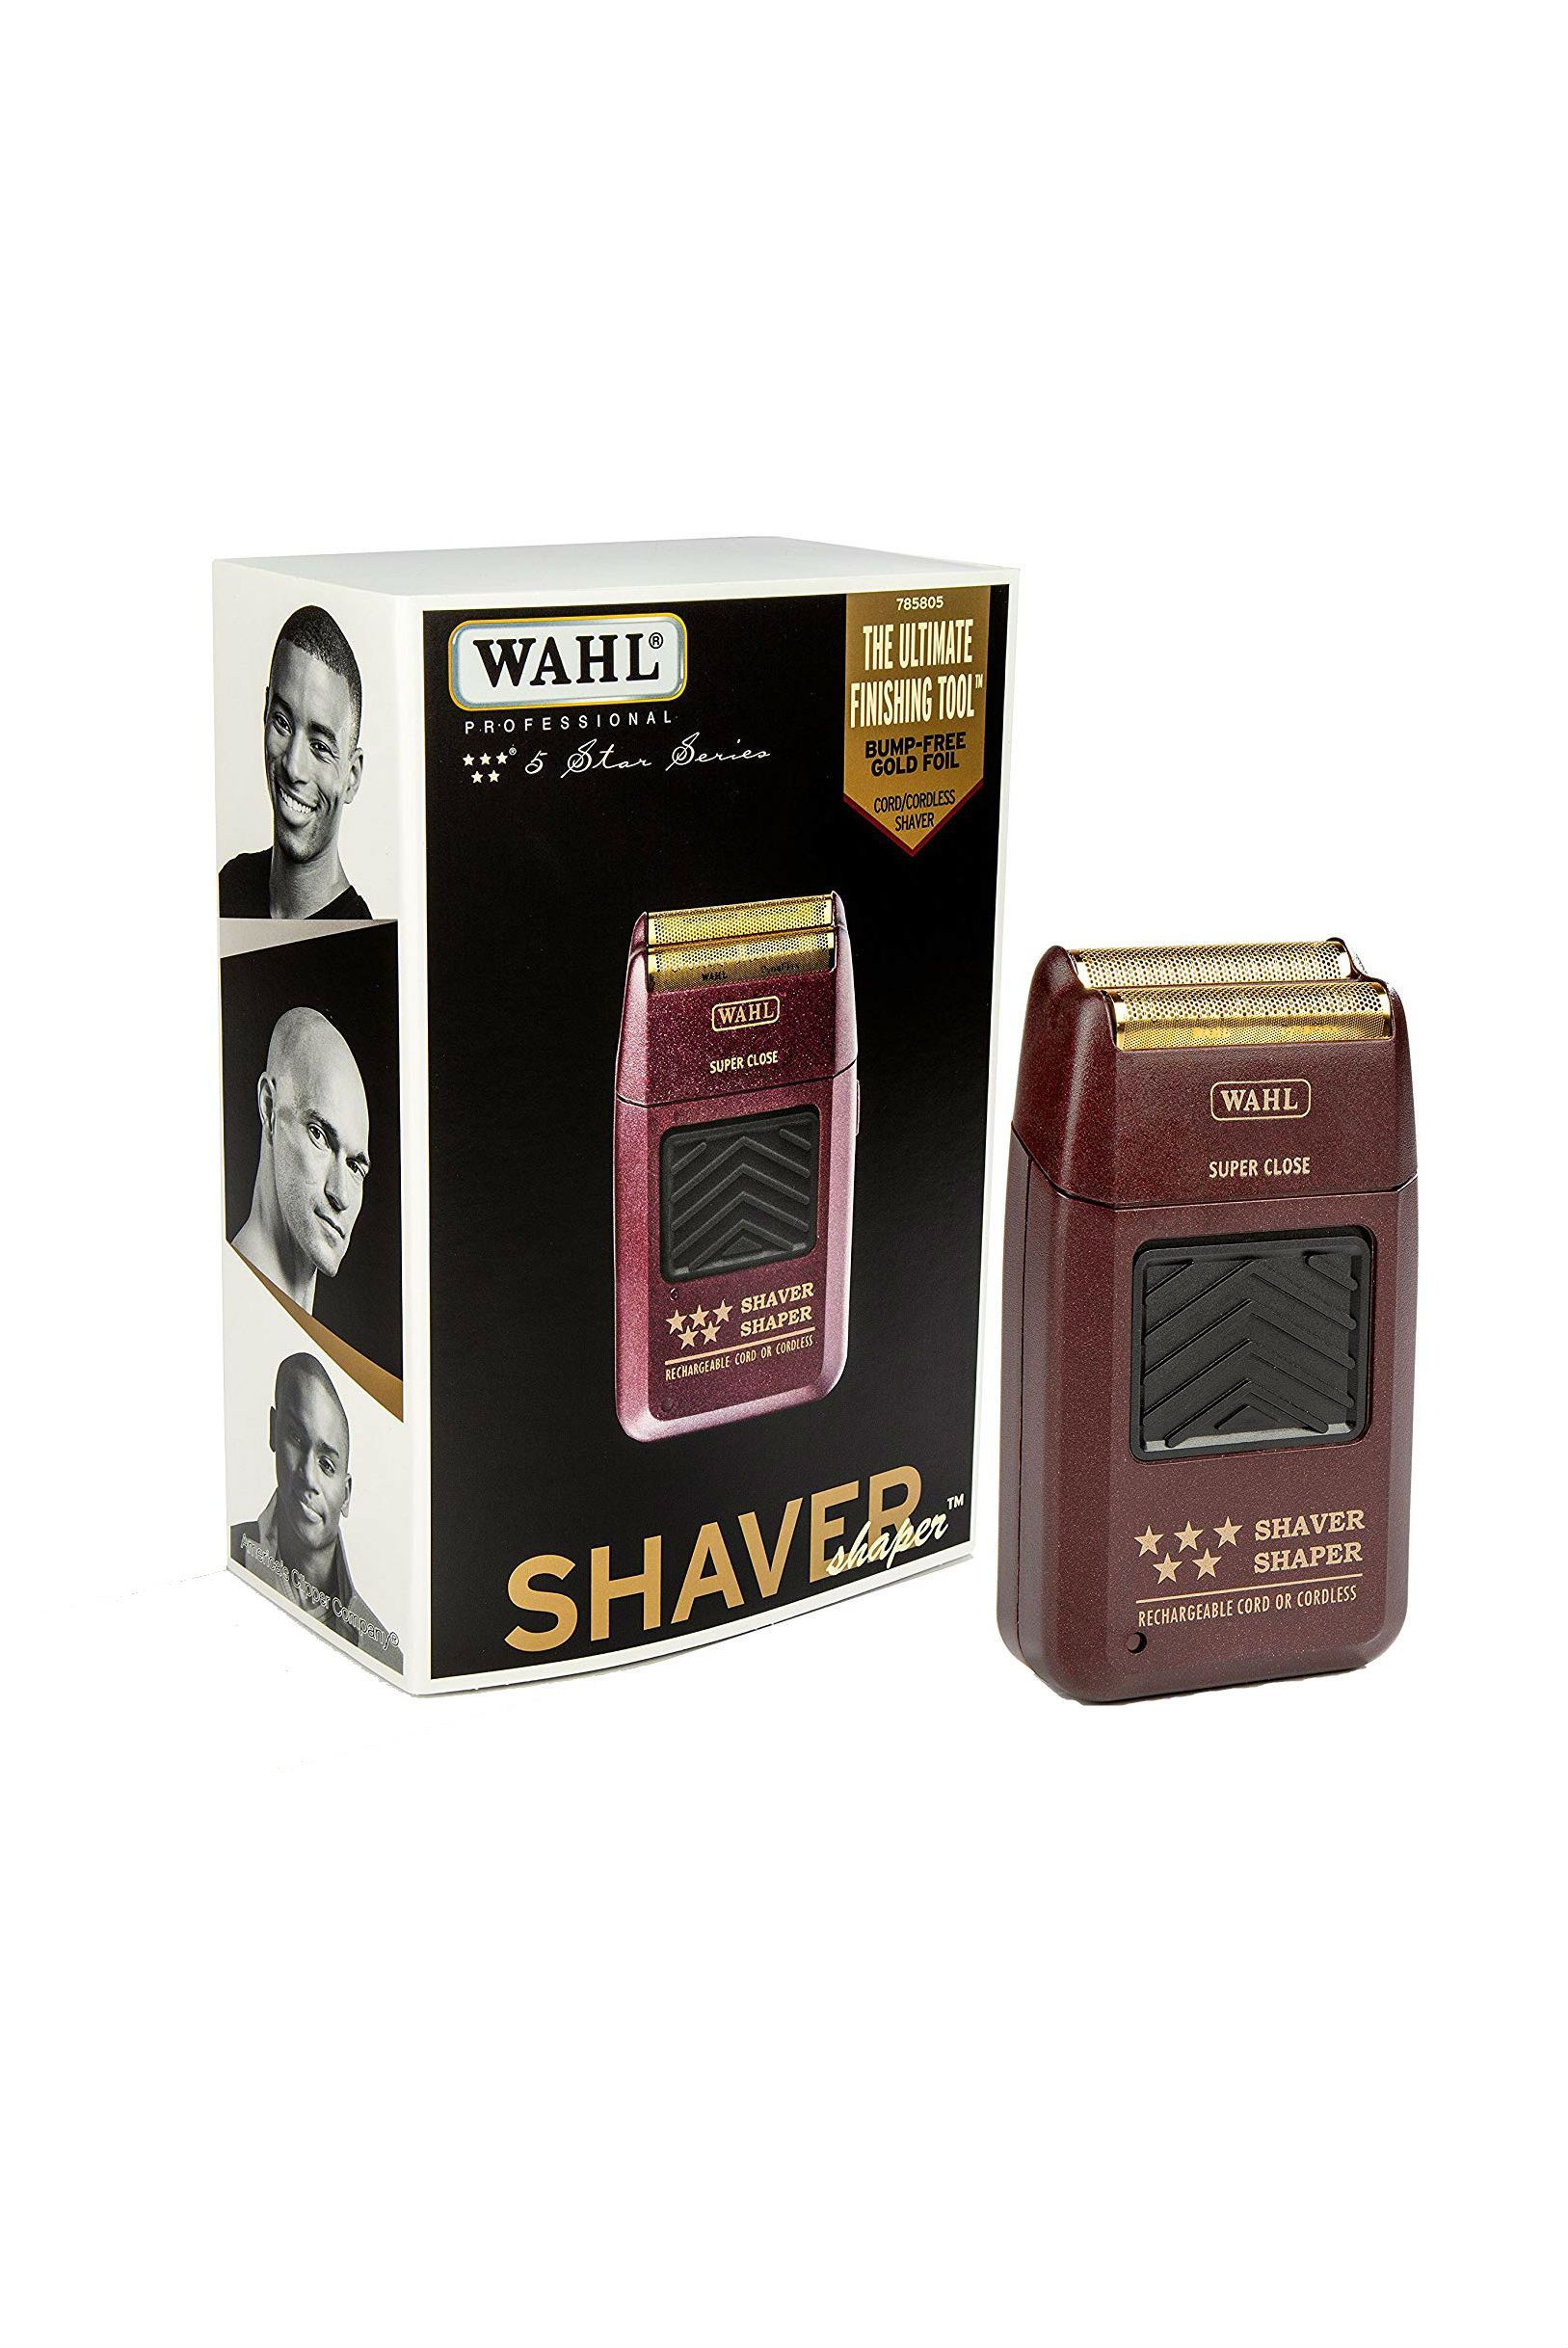 wahl 5 star shaver near me